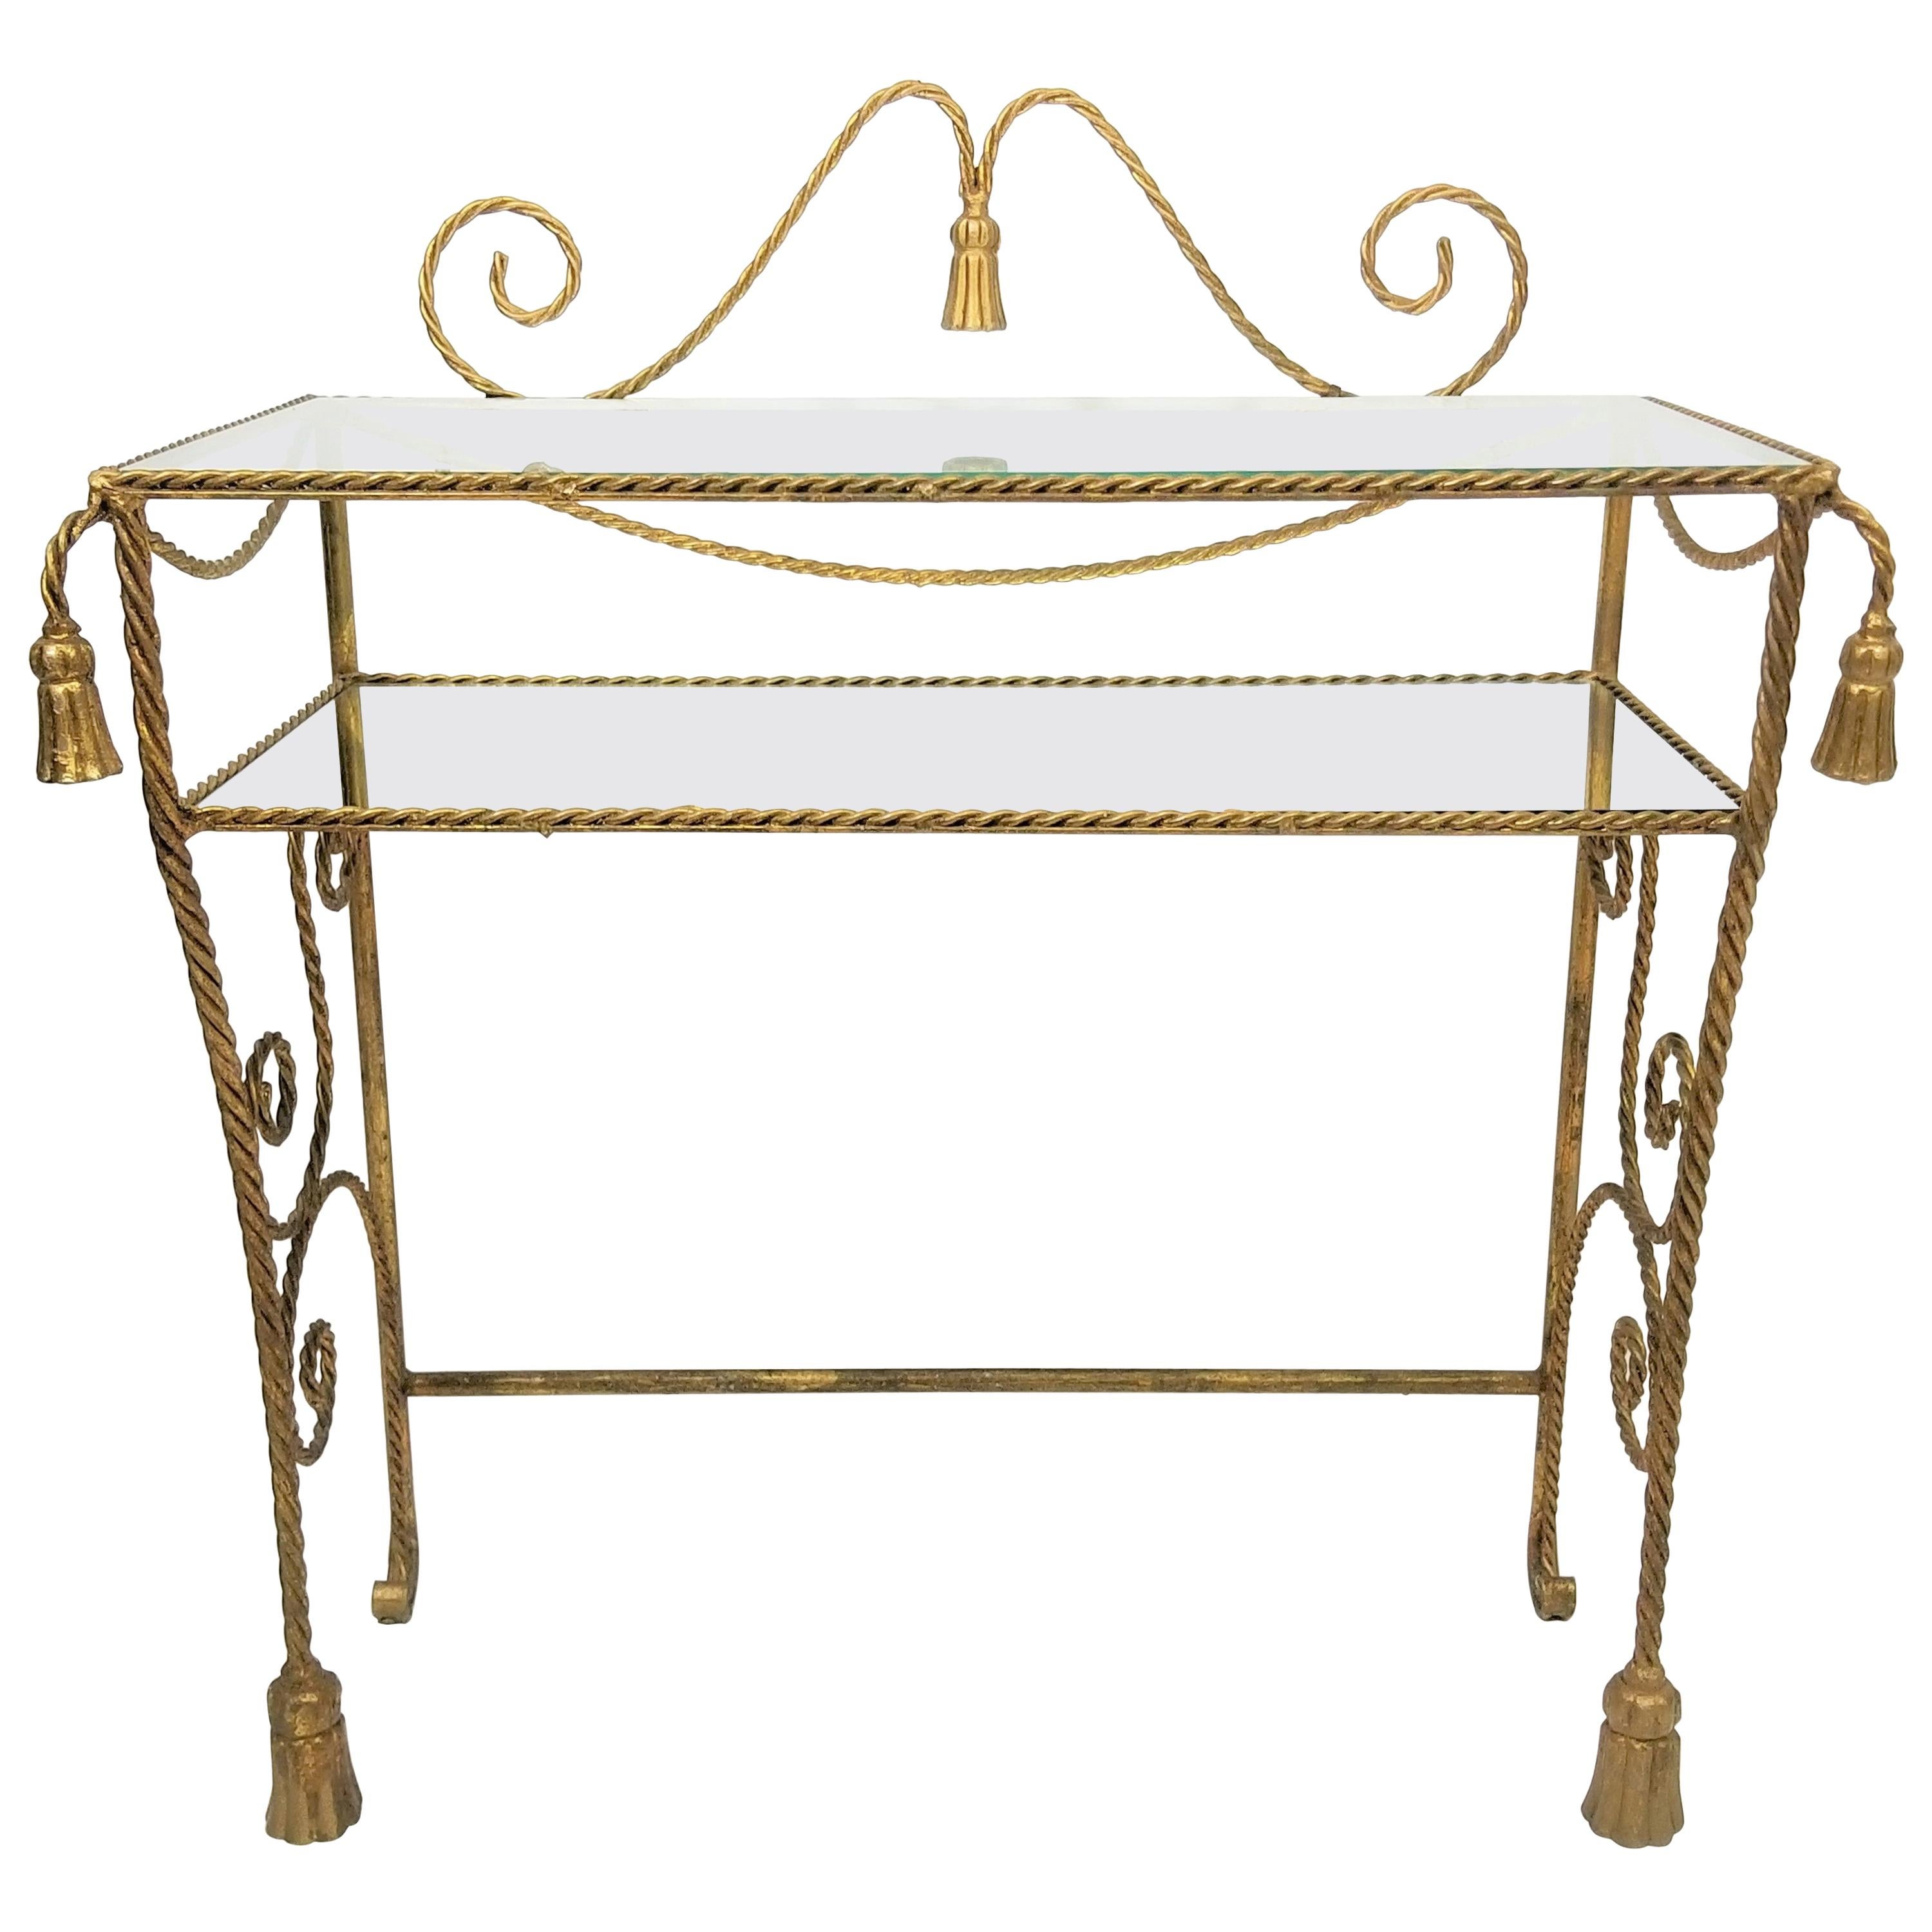 Italian Gilded Rope Tassel Glass Mirror Vanity Dressing Table Made in Italy For Sale